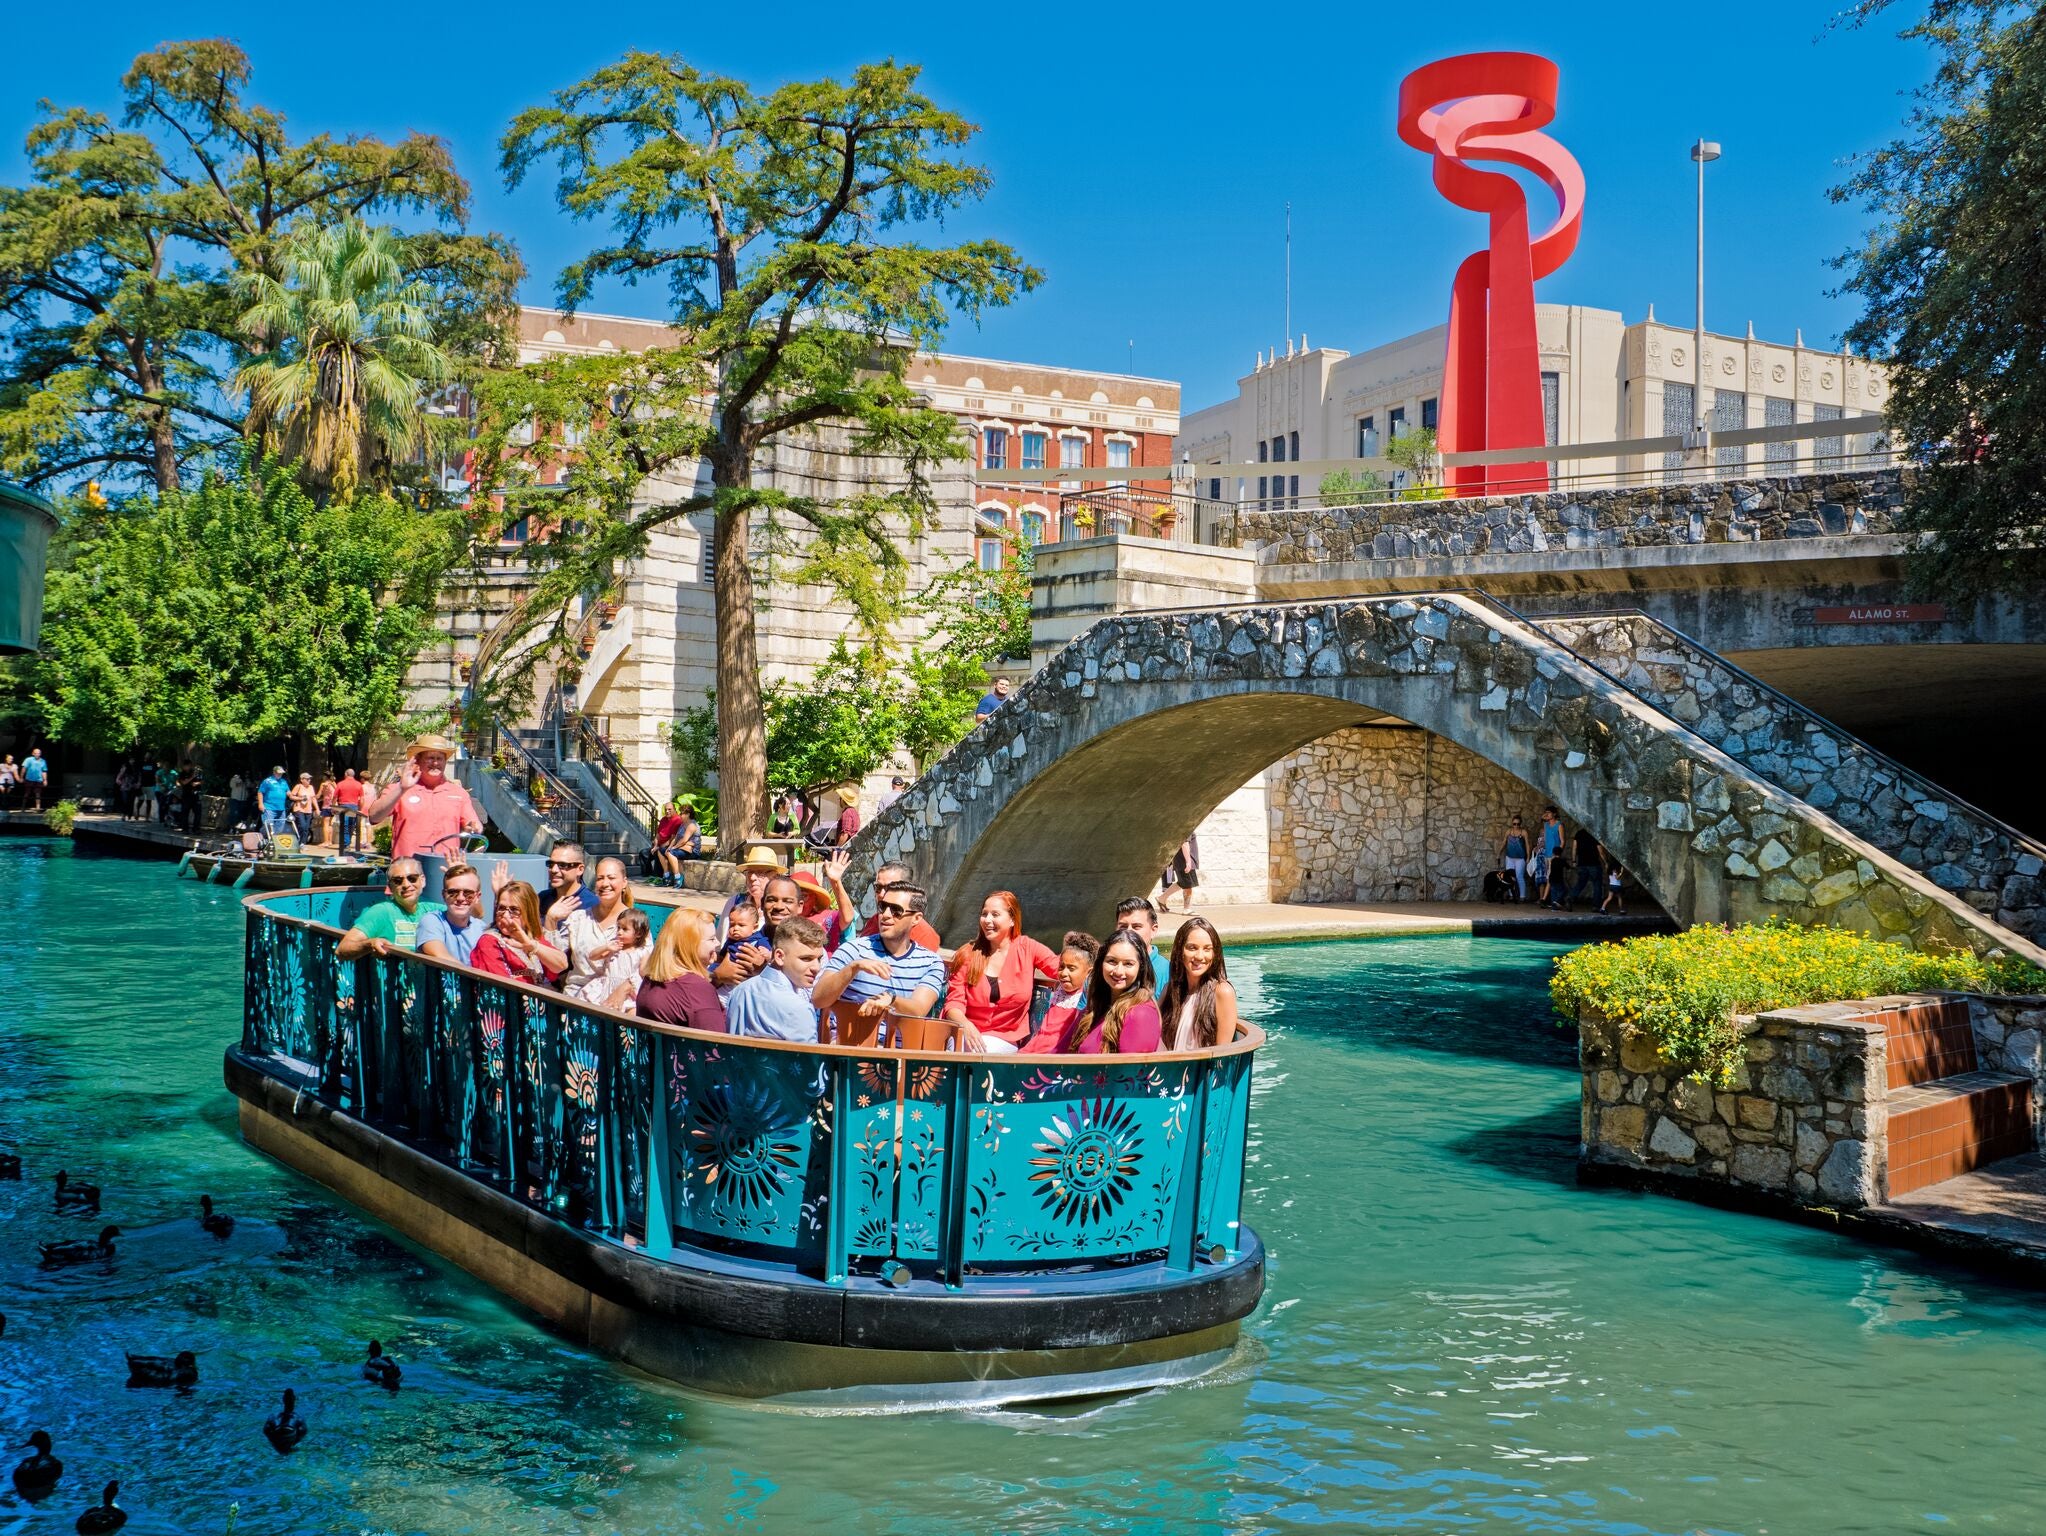 Enjoy a feast for all the senses in diverse, vibrant San Antonio The